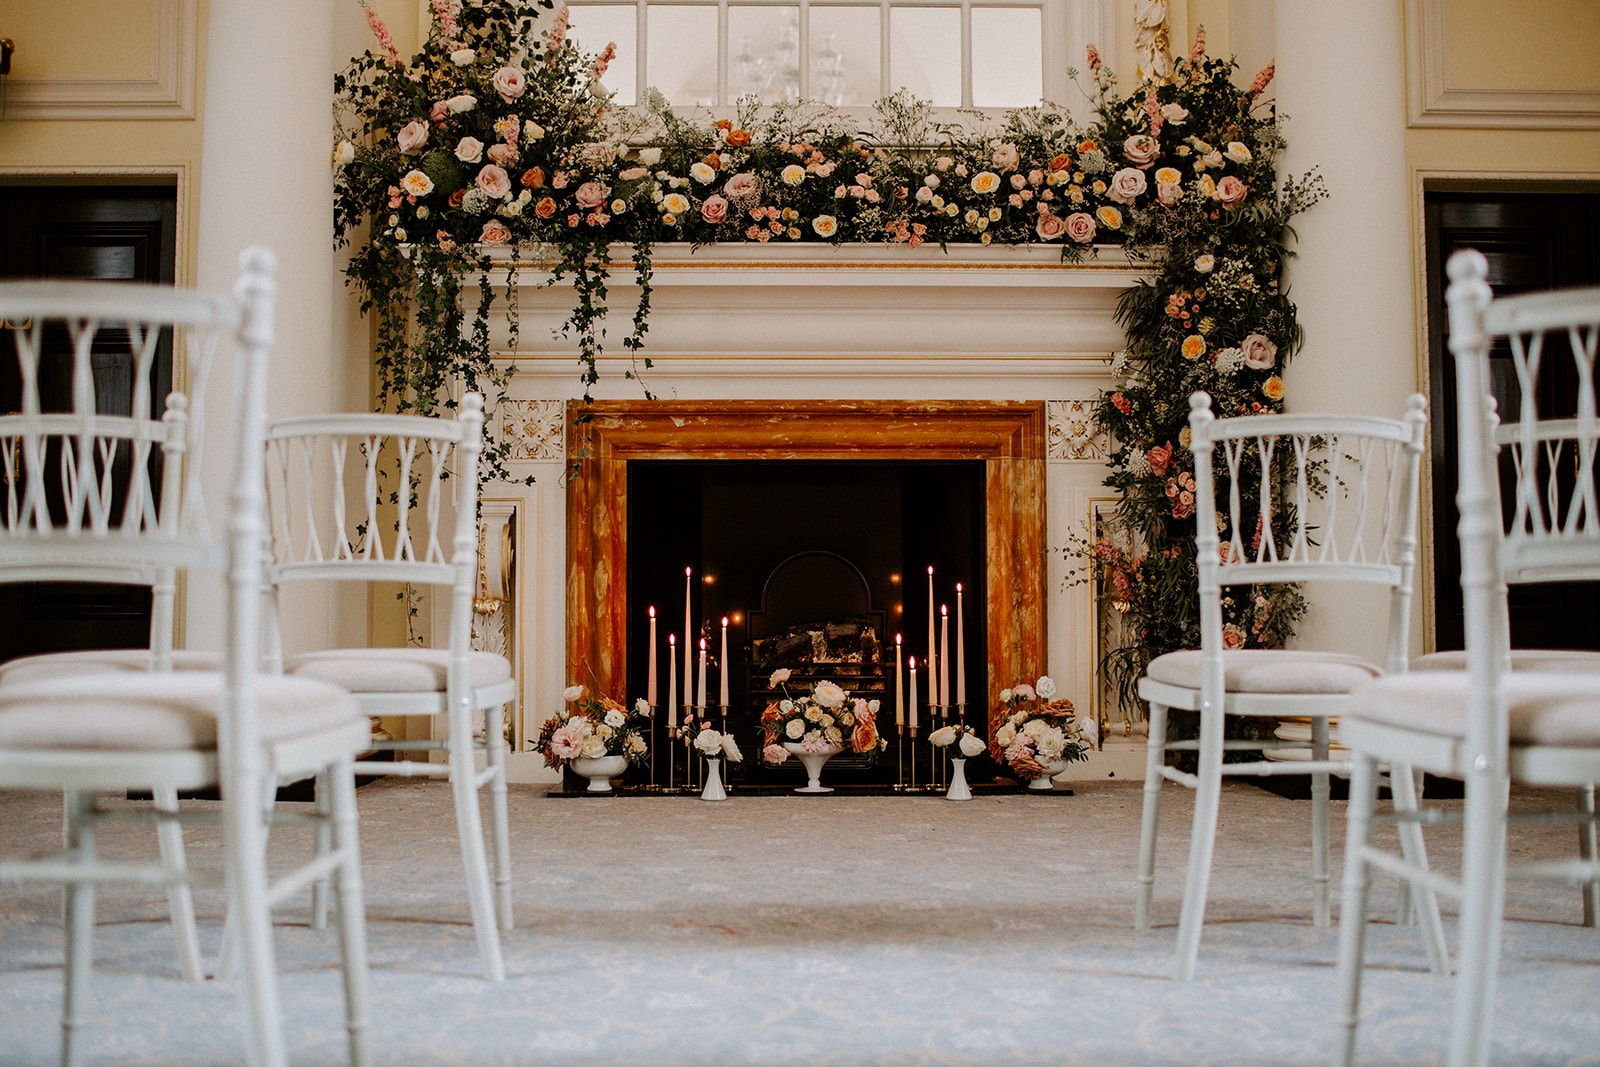 Wedding venue dreams – make them all about you